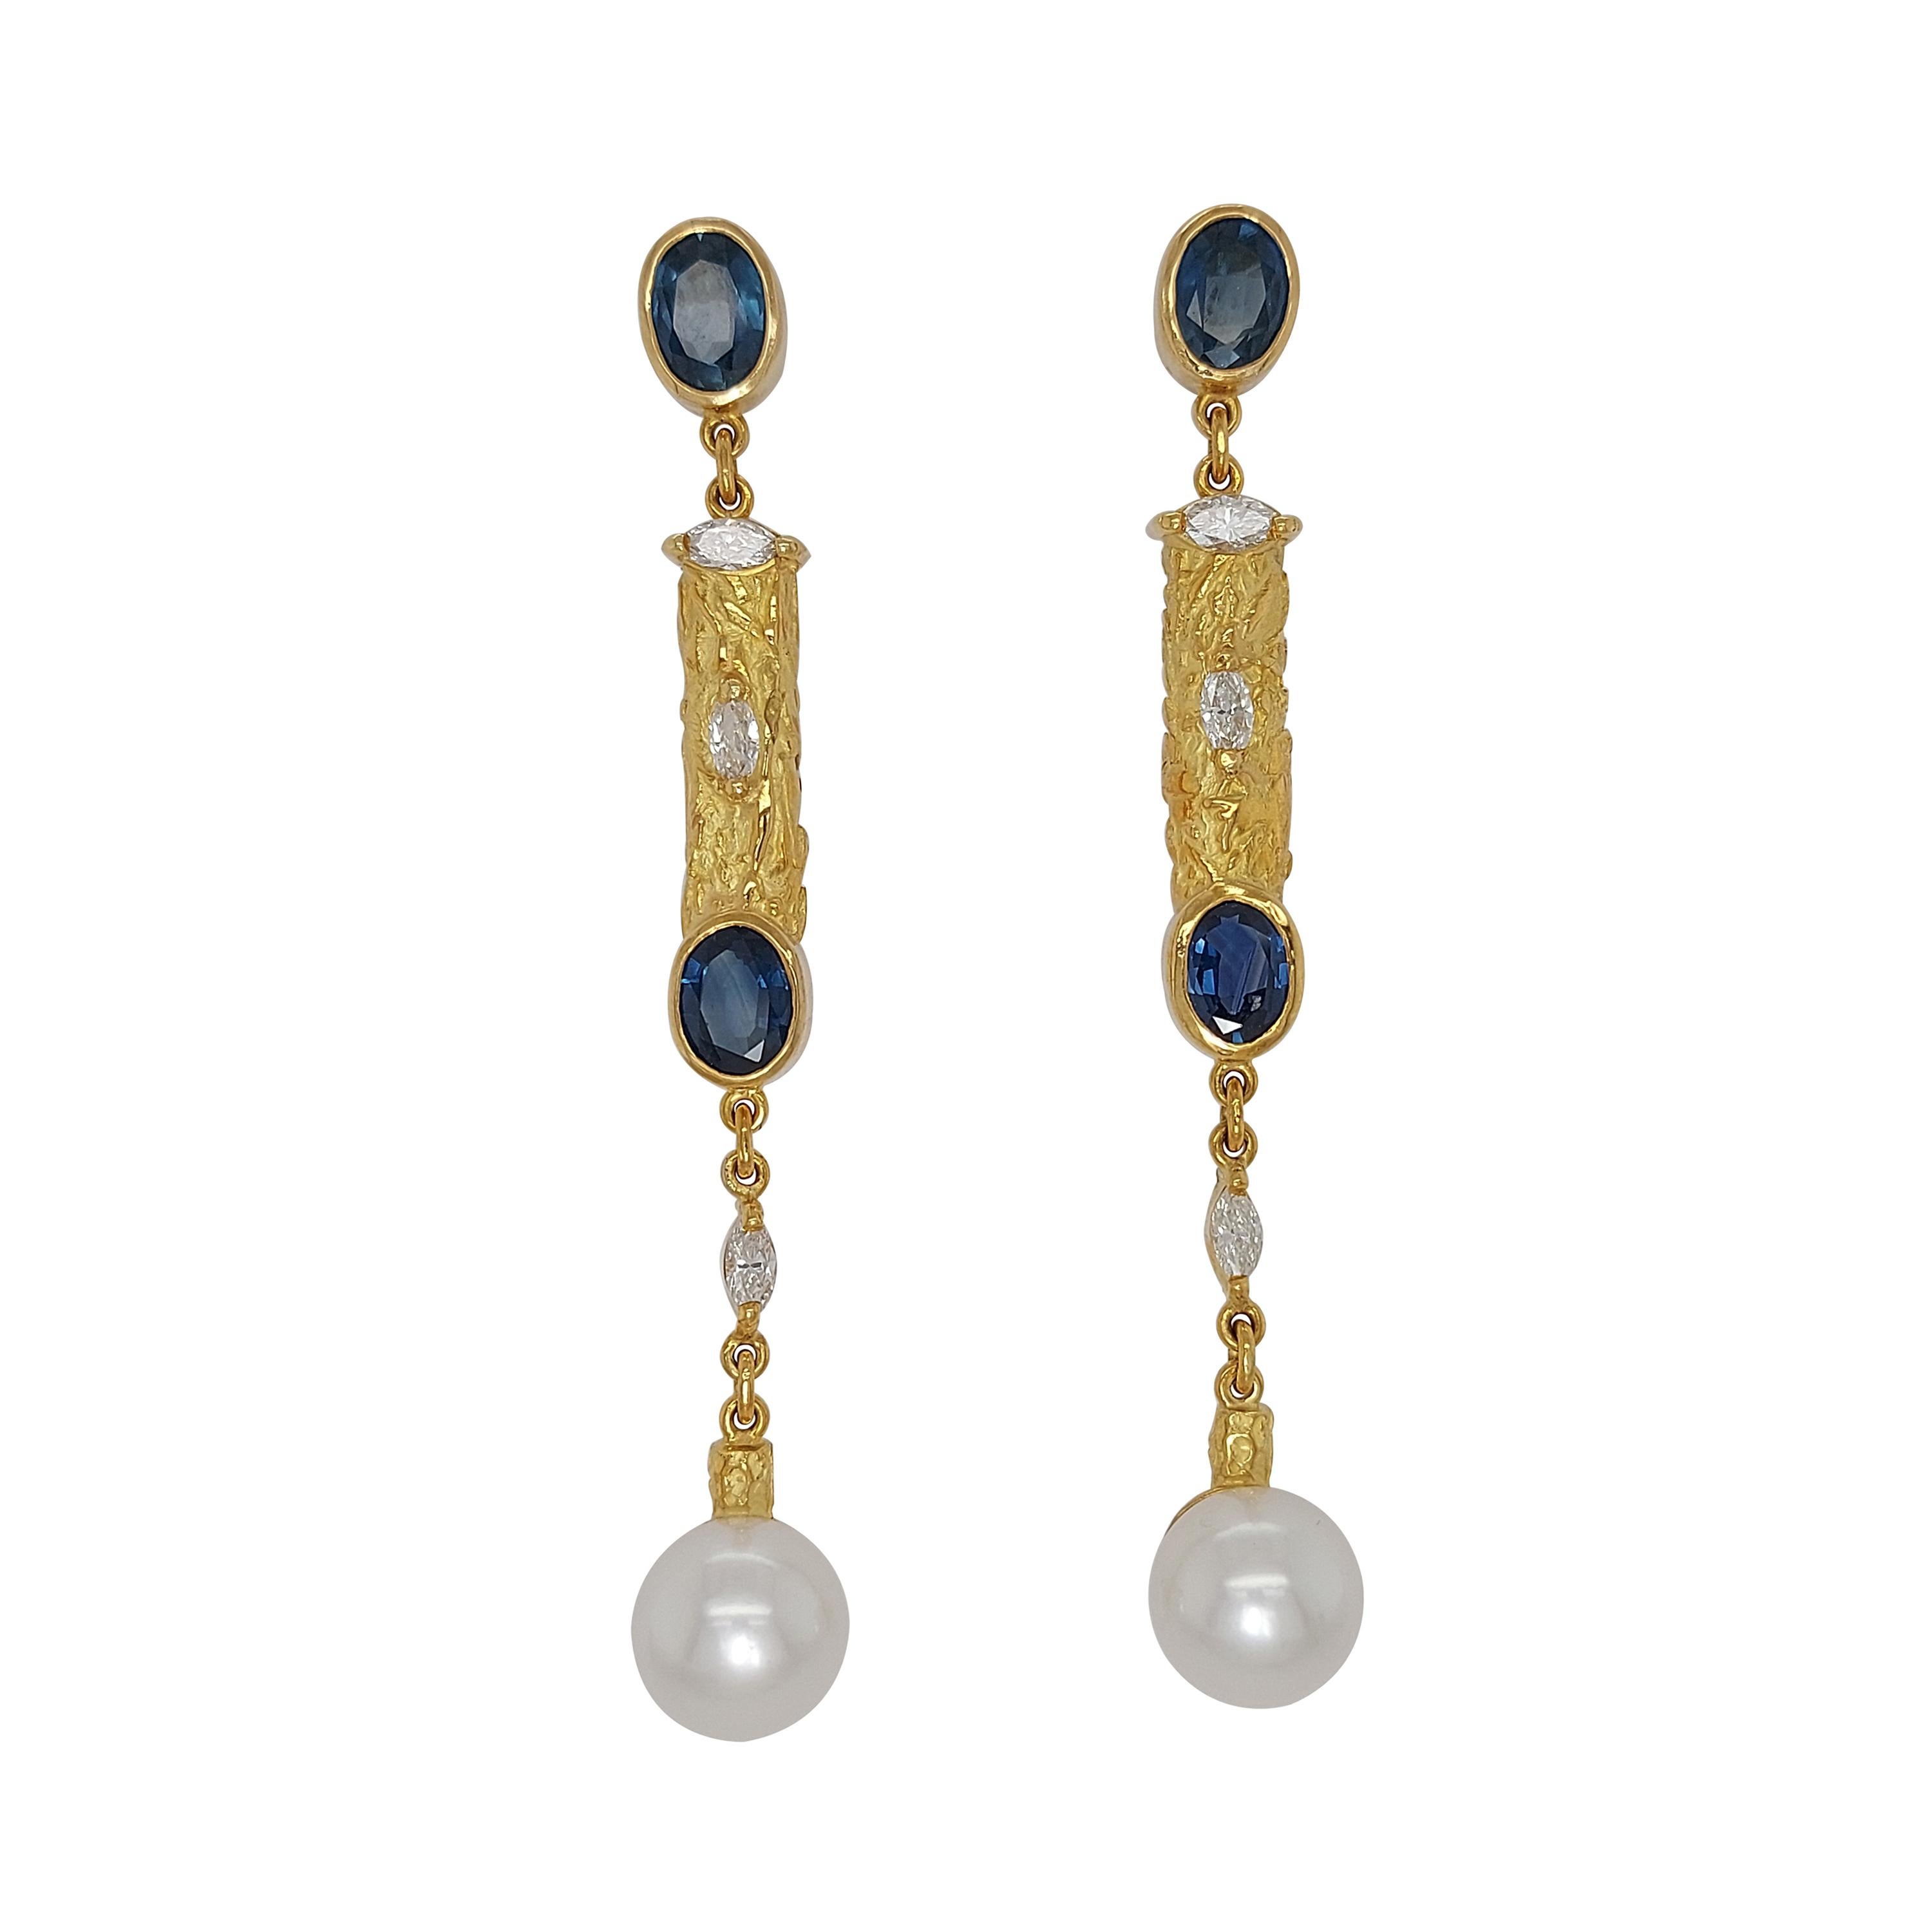 J.P De Saedeleer 18 Kt gold Earrings with 5.84 Ct Sapphires, Diamonds, Pearl For Sale